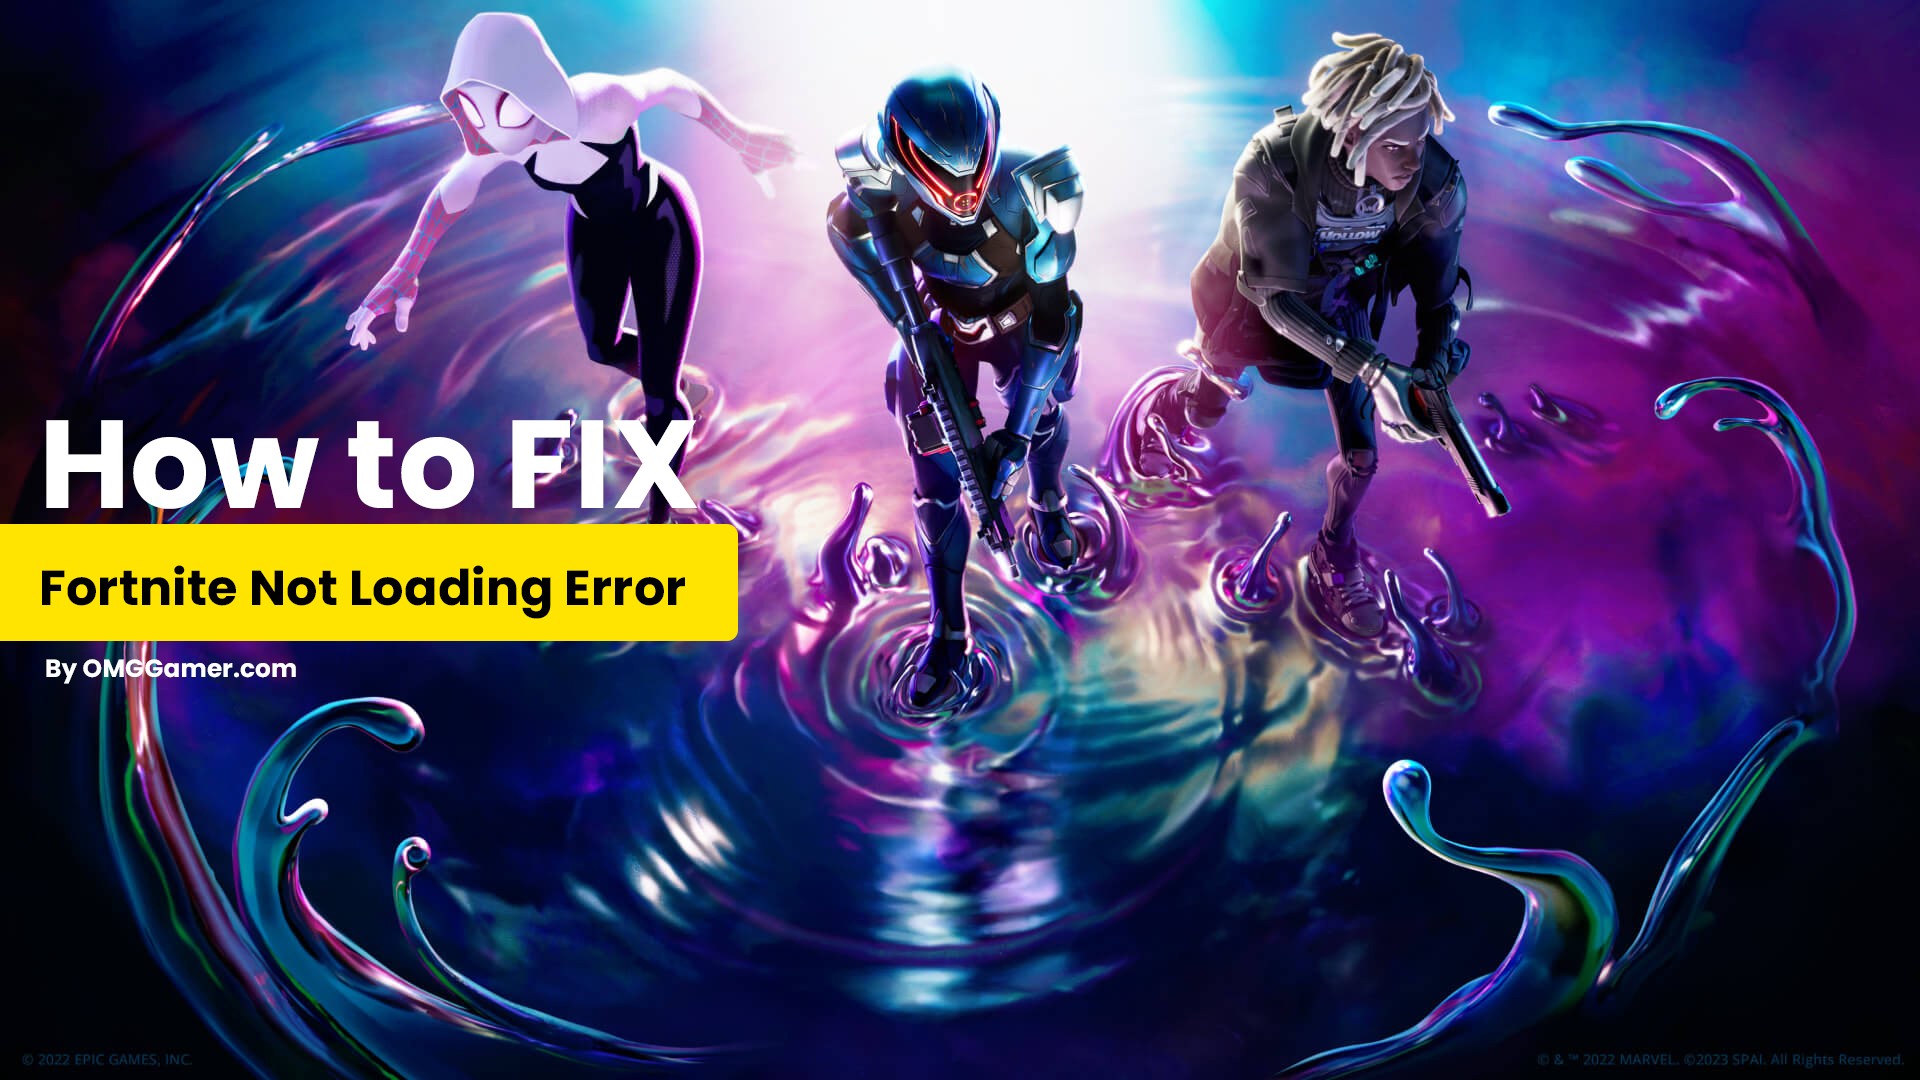 How to Fix Fortnite Not Loading Error [Guide]